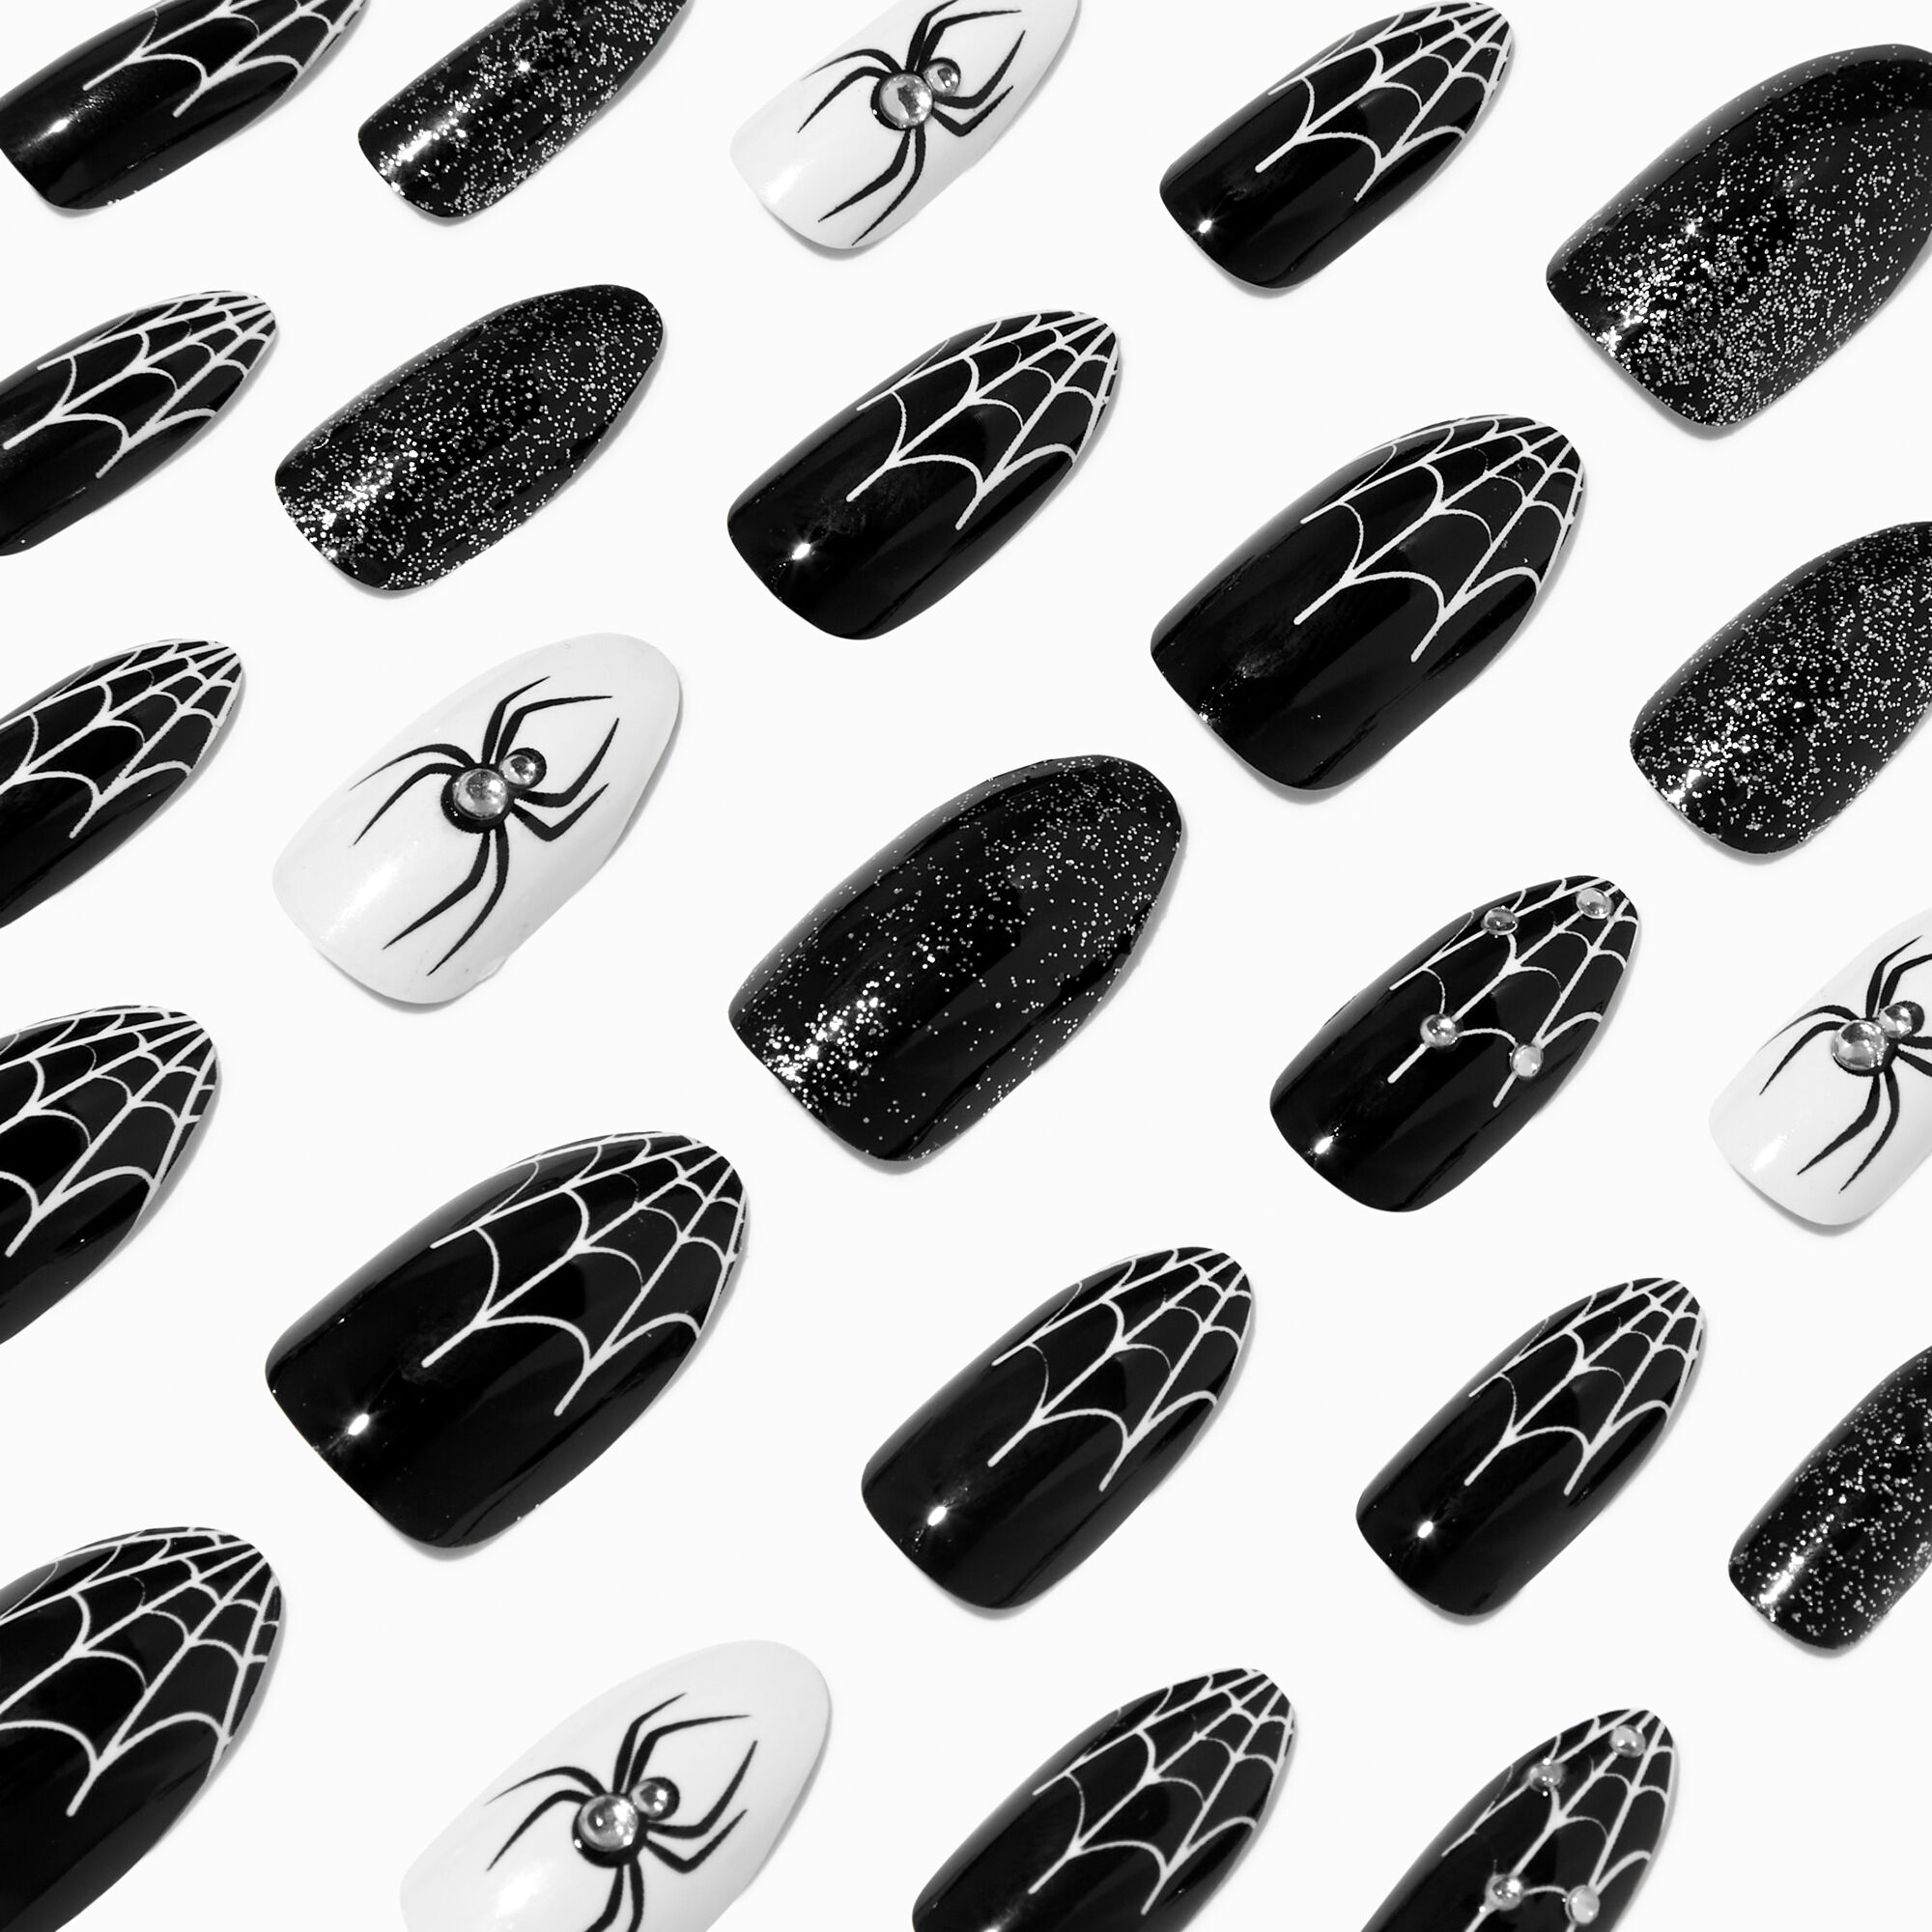 View Claires Spiders Webs Glow In The Dark Press On Faux Nail Set 24 Pack information